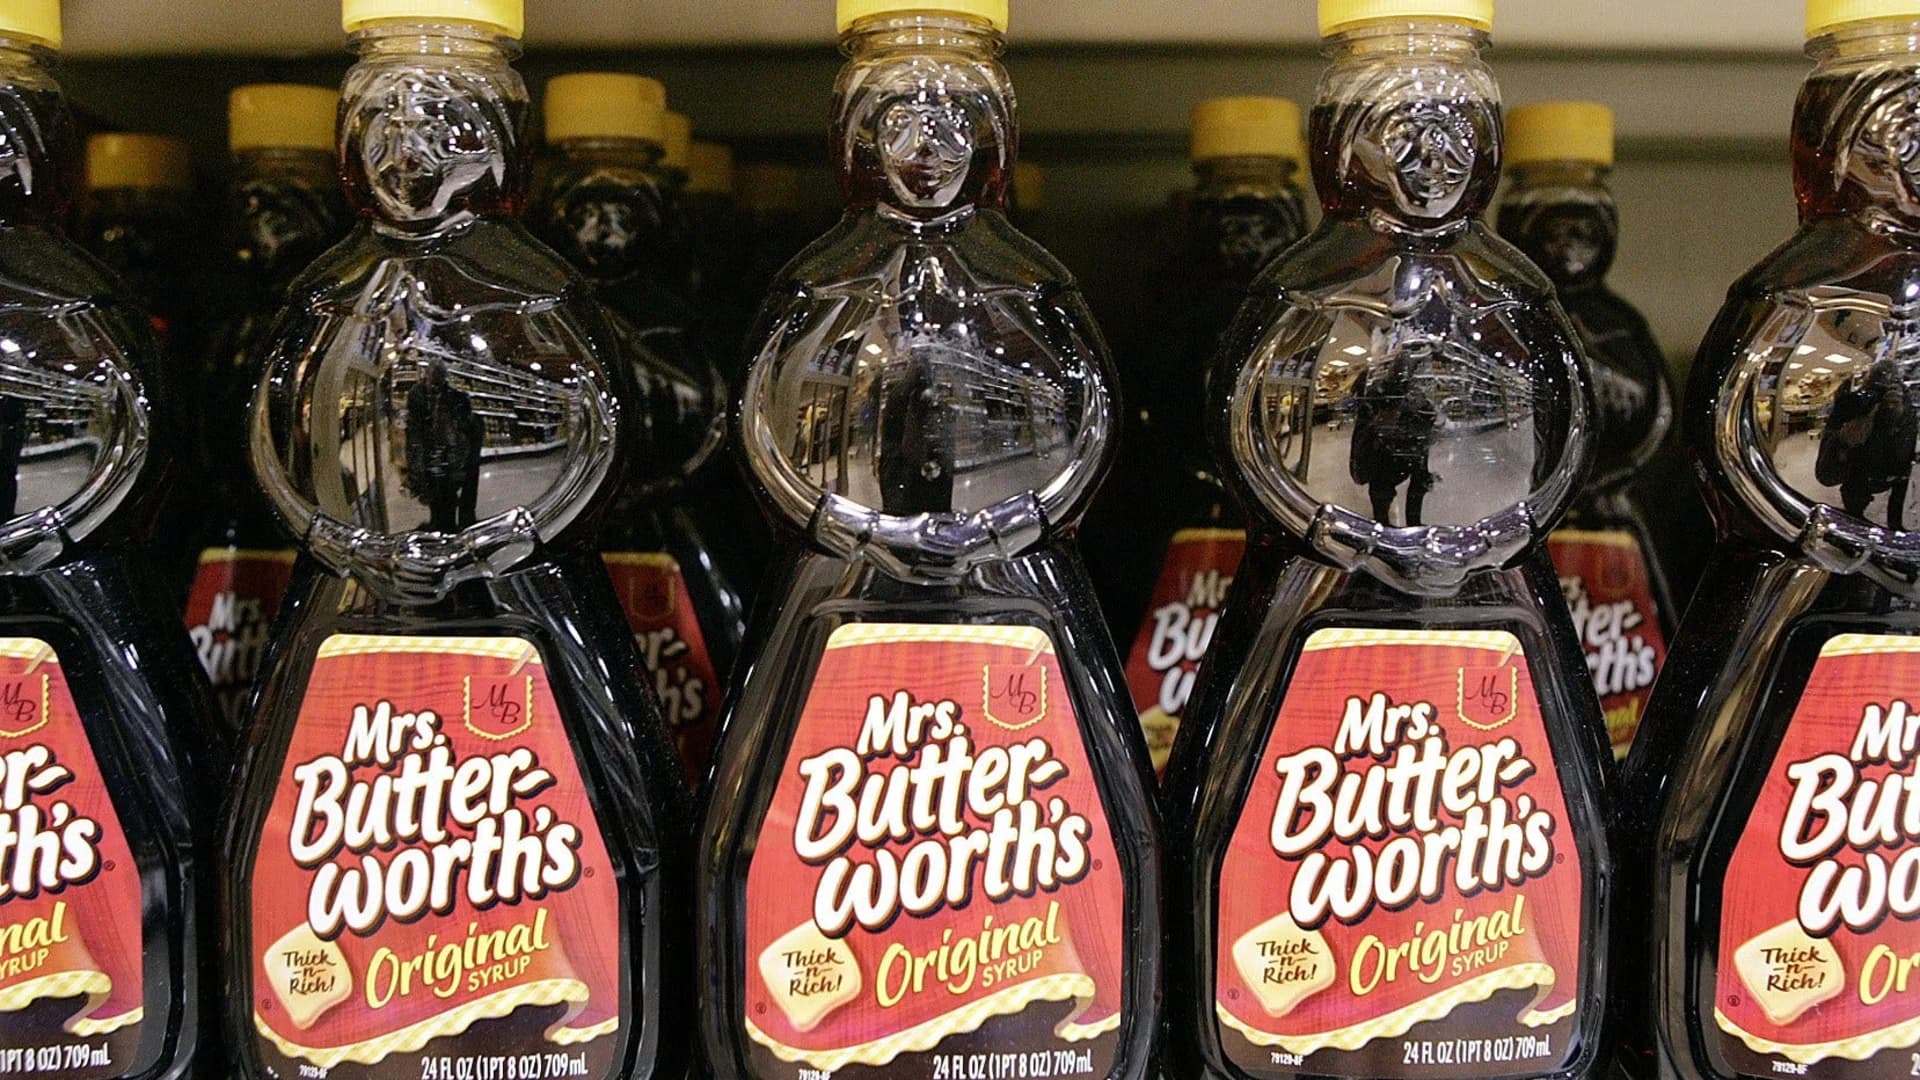 Mrs. Butterworth's to undergo complete brand and packaging review